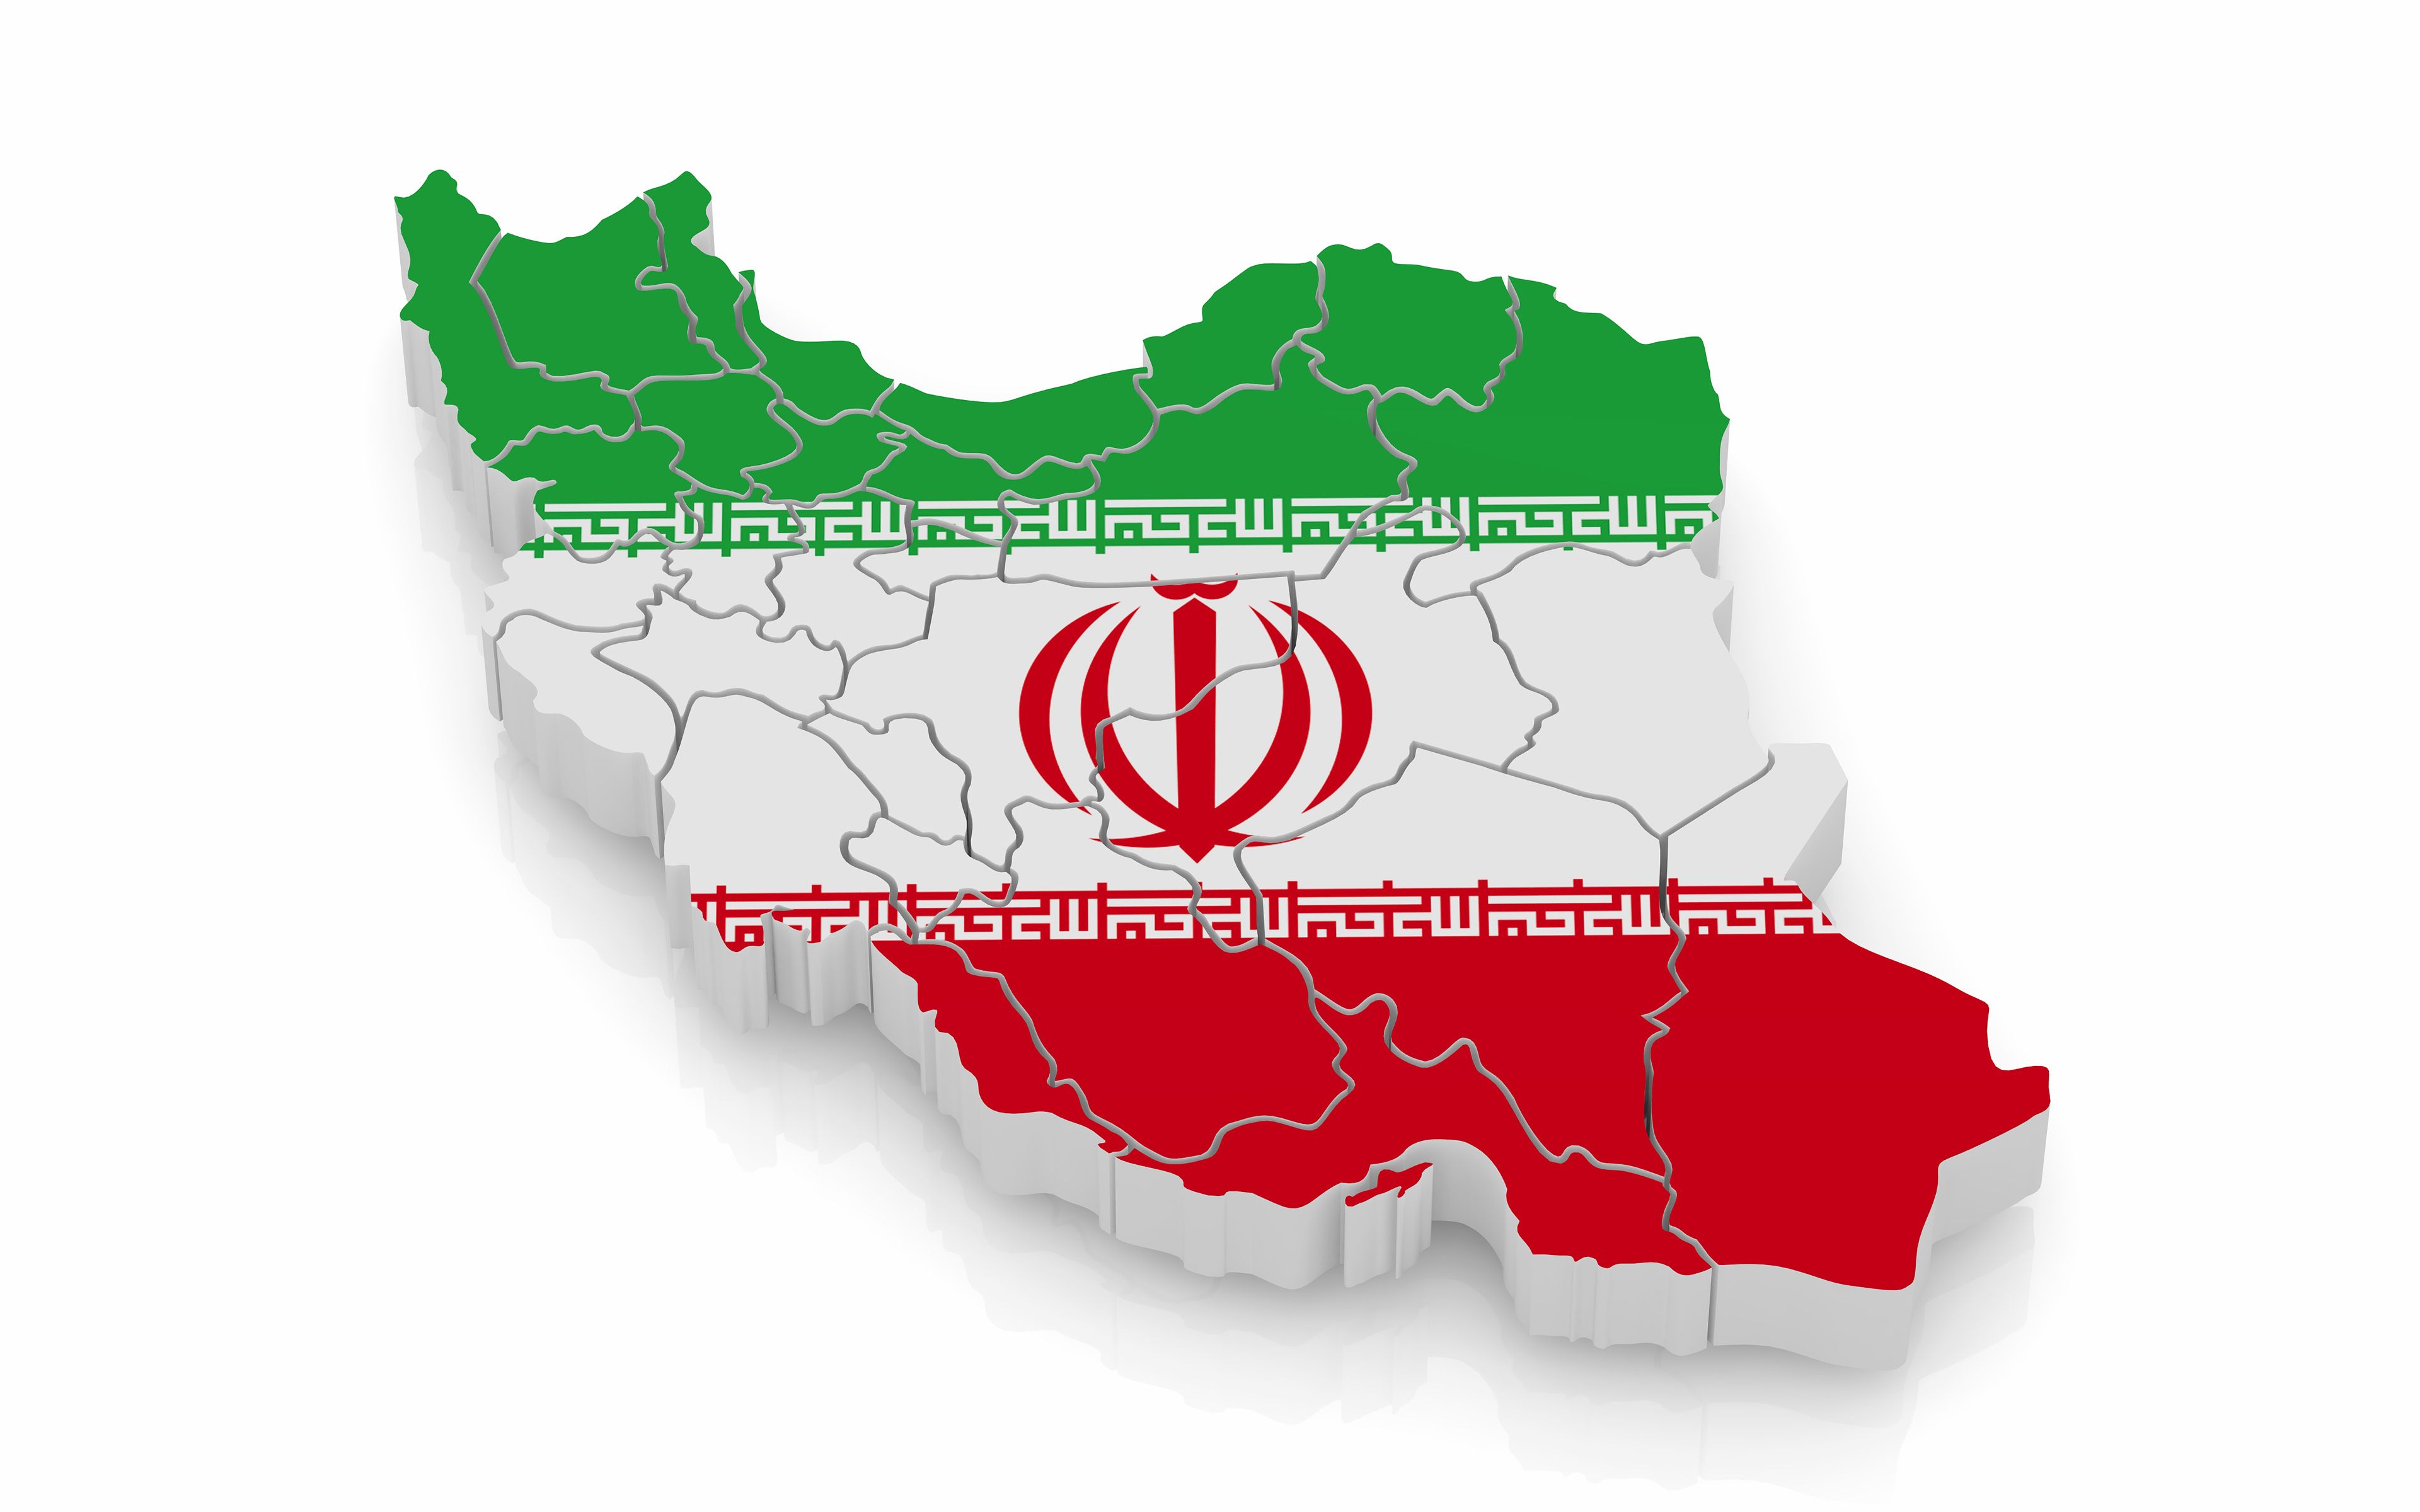 Download wallpaper 3D Iran map, 3D Iran flag, Iranian flag, 3D map of Iran with flag, creative 3D art, Iran flag for desktop with resolution 3840x2400. High Quality HD picture wallpaper